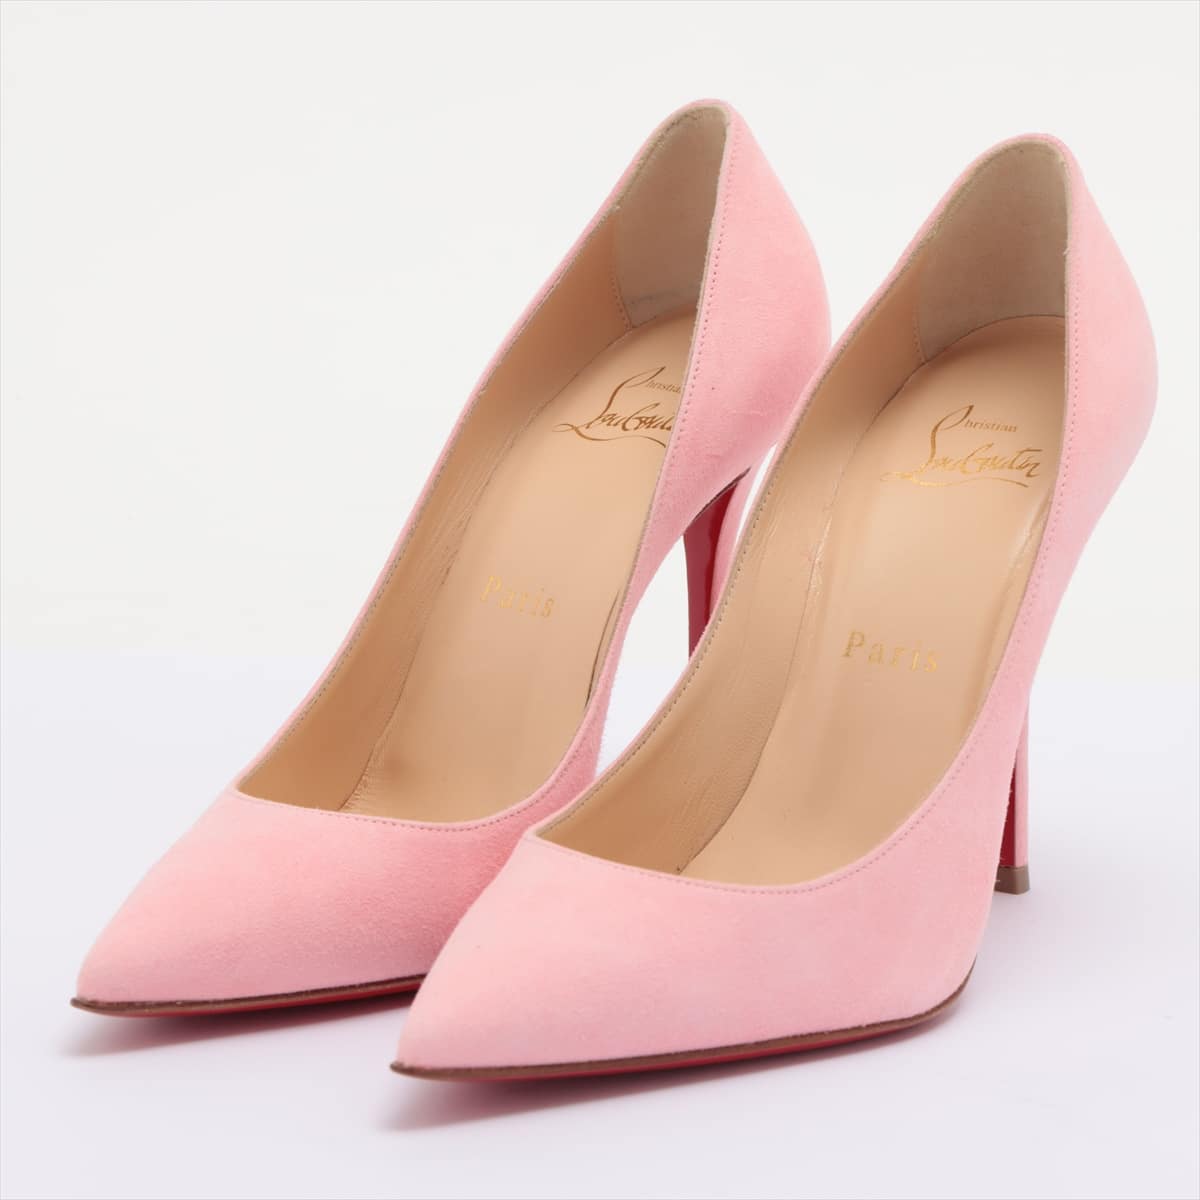 Christian Louboutin Suede Pumps 36 1/2 Ladies' Pink